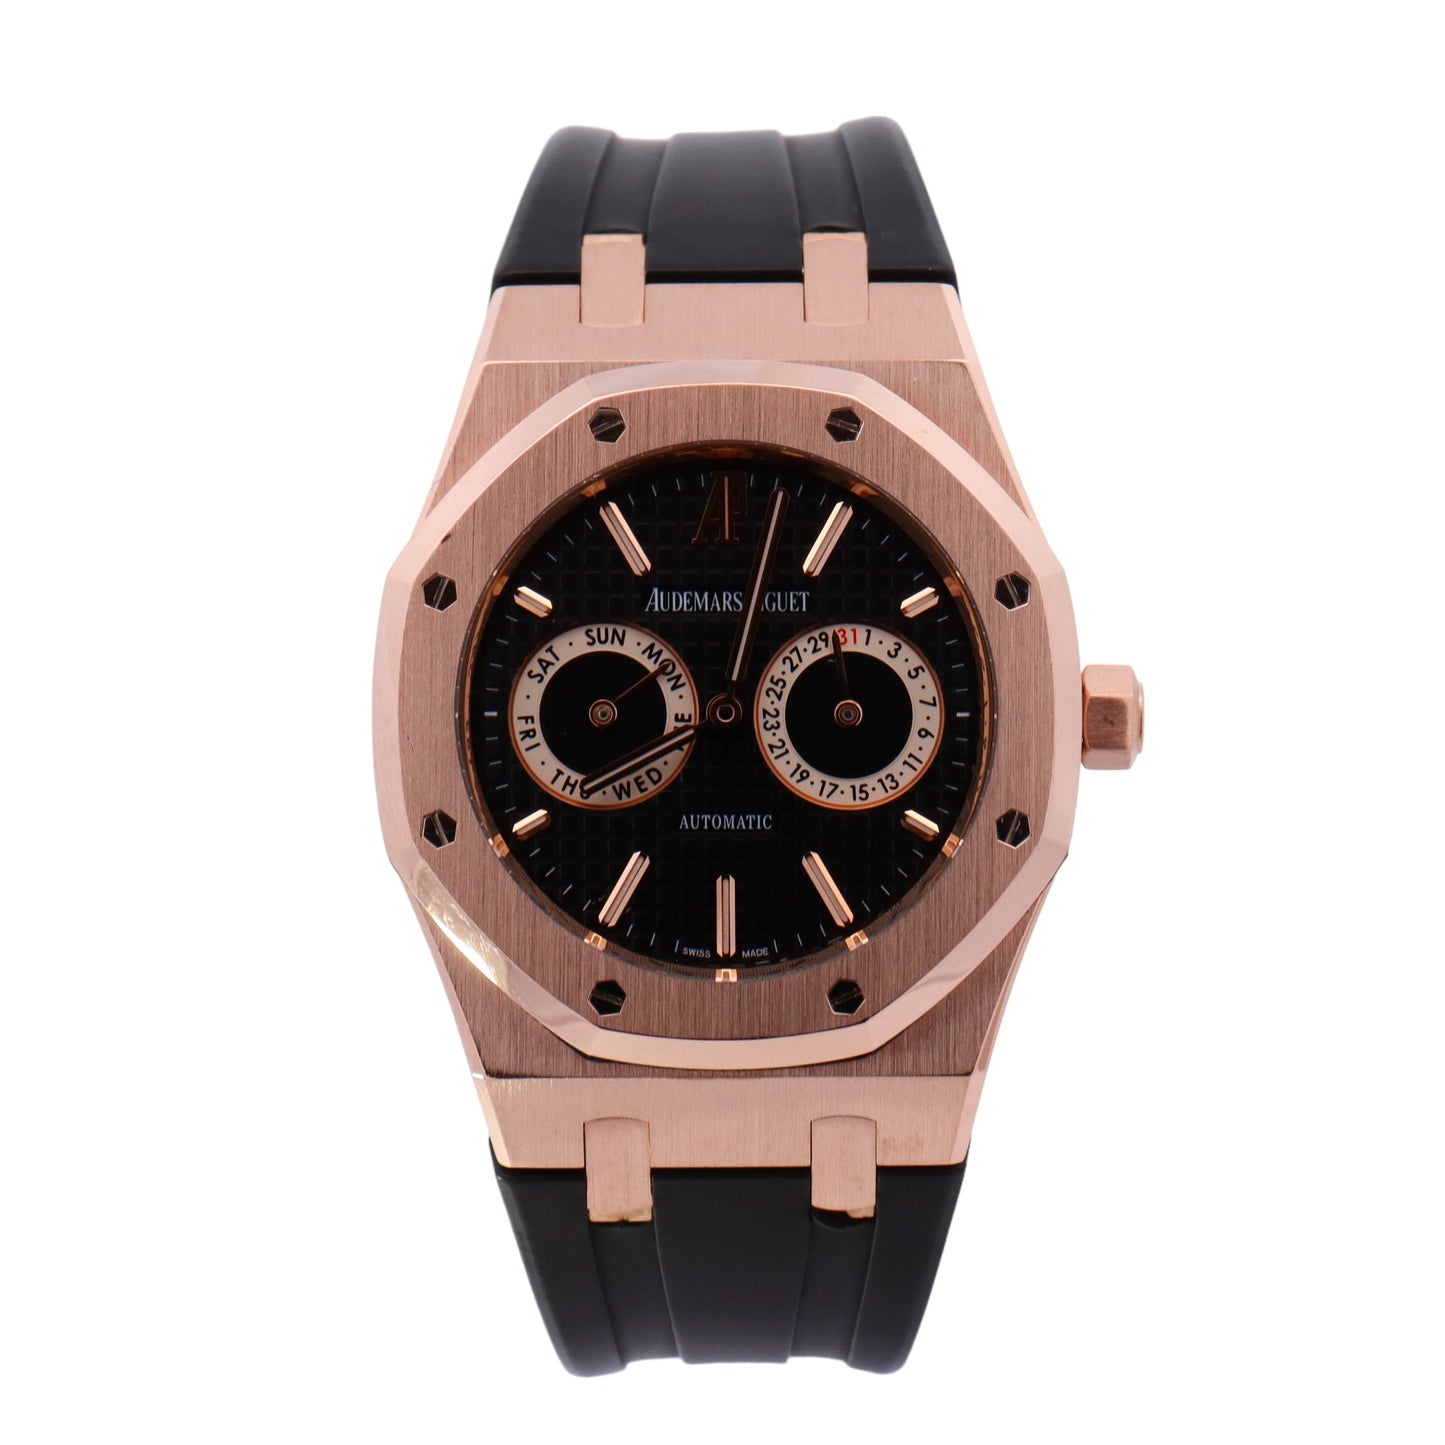 Audemars Piguet Royal Oak Day-Date "Owl" Rose Gold 39mm Black Stick Dial Watch Reference# 26330OR.OO.D088CR.01 - Happy Jewelers Fine Jewelry Lifetime Warranty